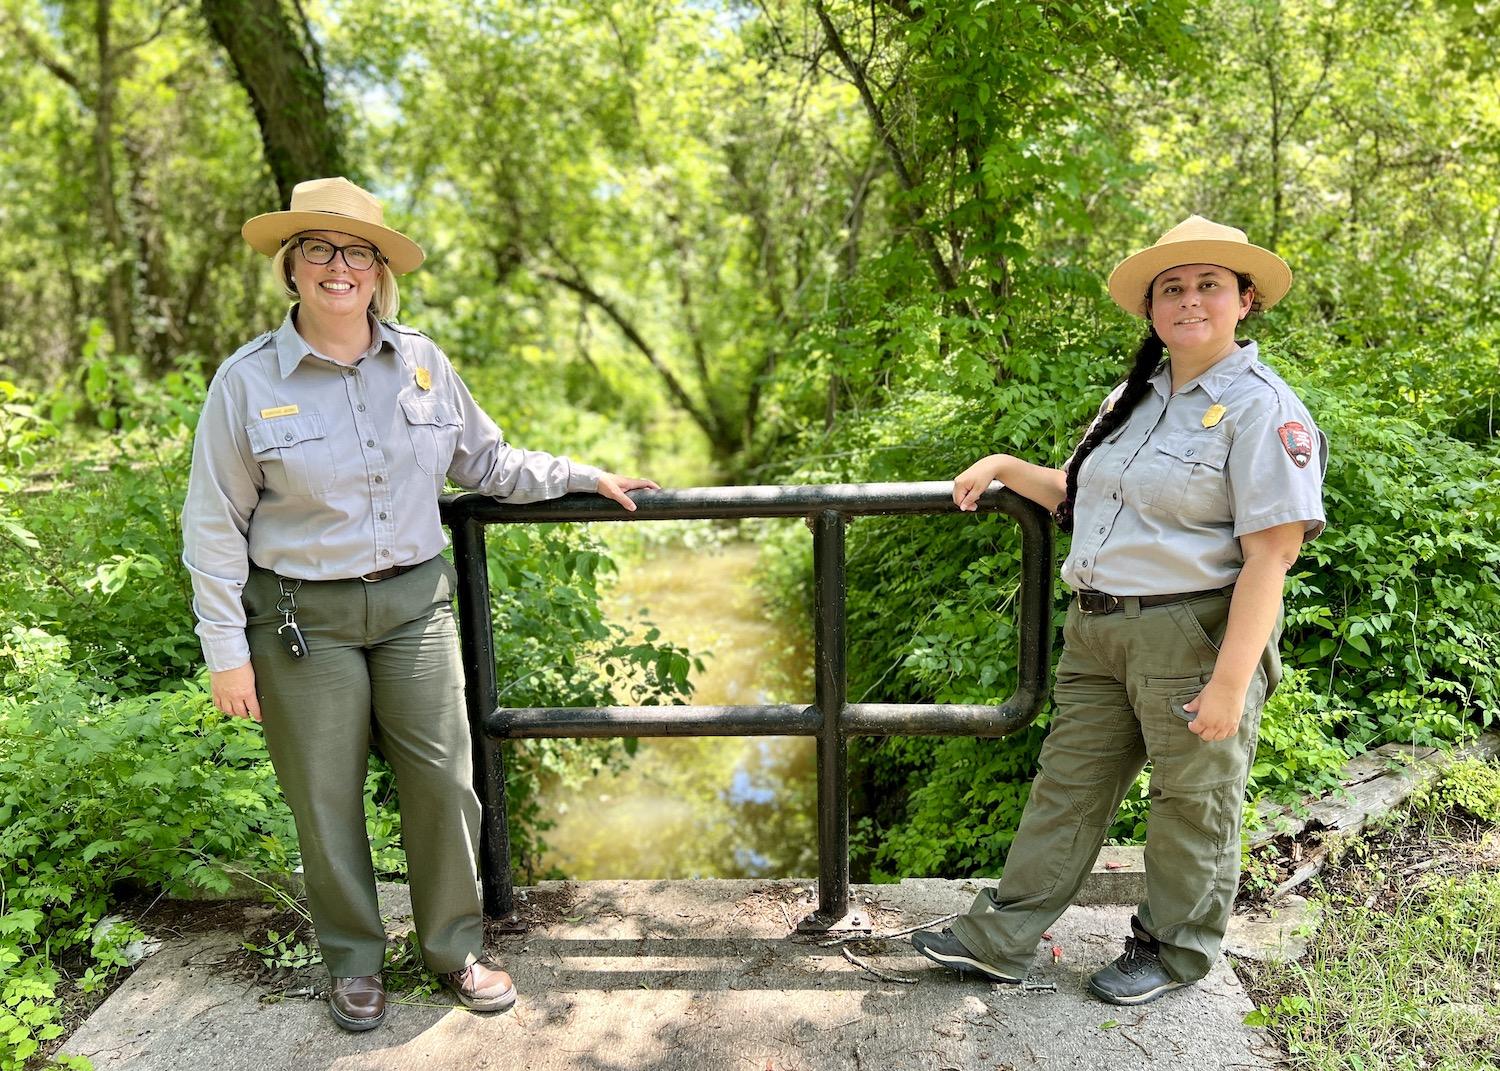 San Antonio Missions Superintendent Christine Jacobs and Ranger Destiny Gardea stand over an acequia at the Espada Aqueduct.